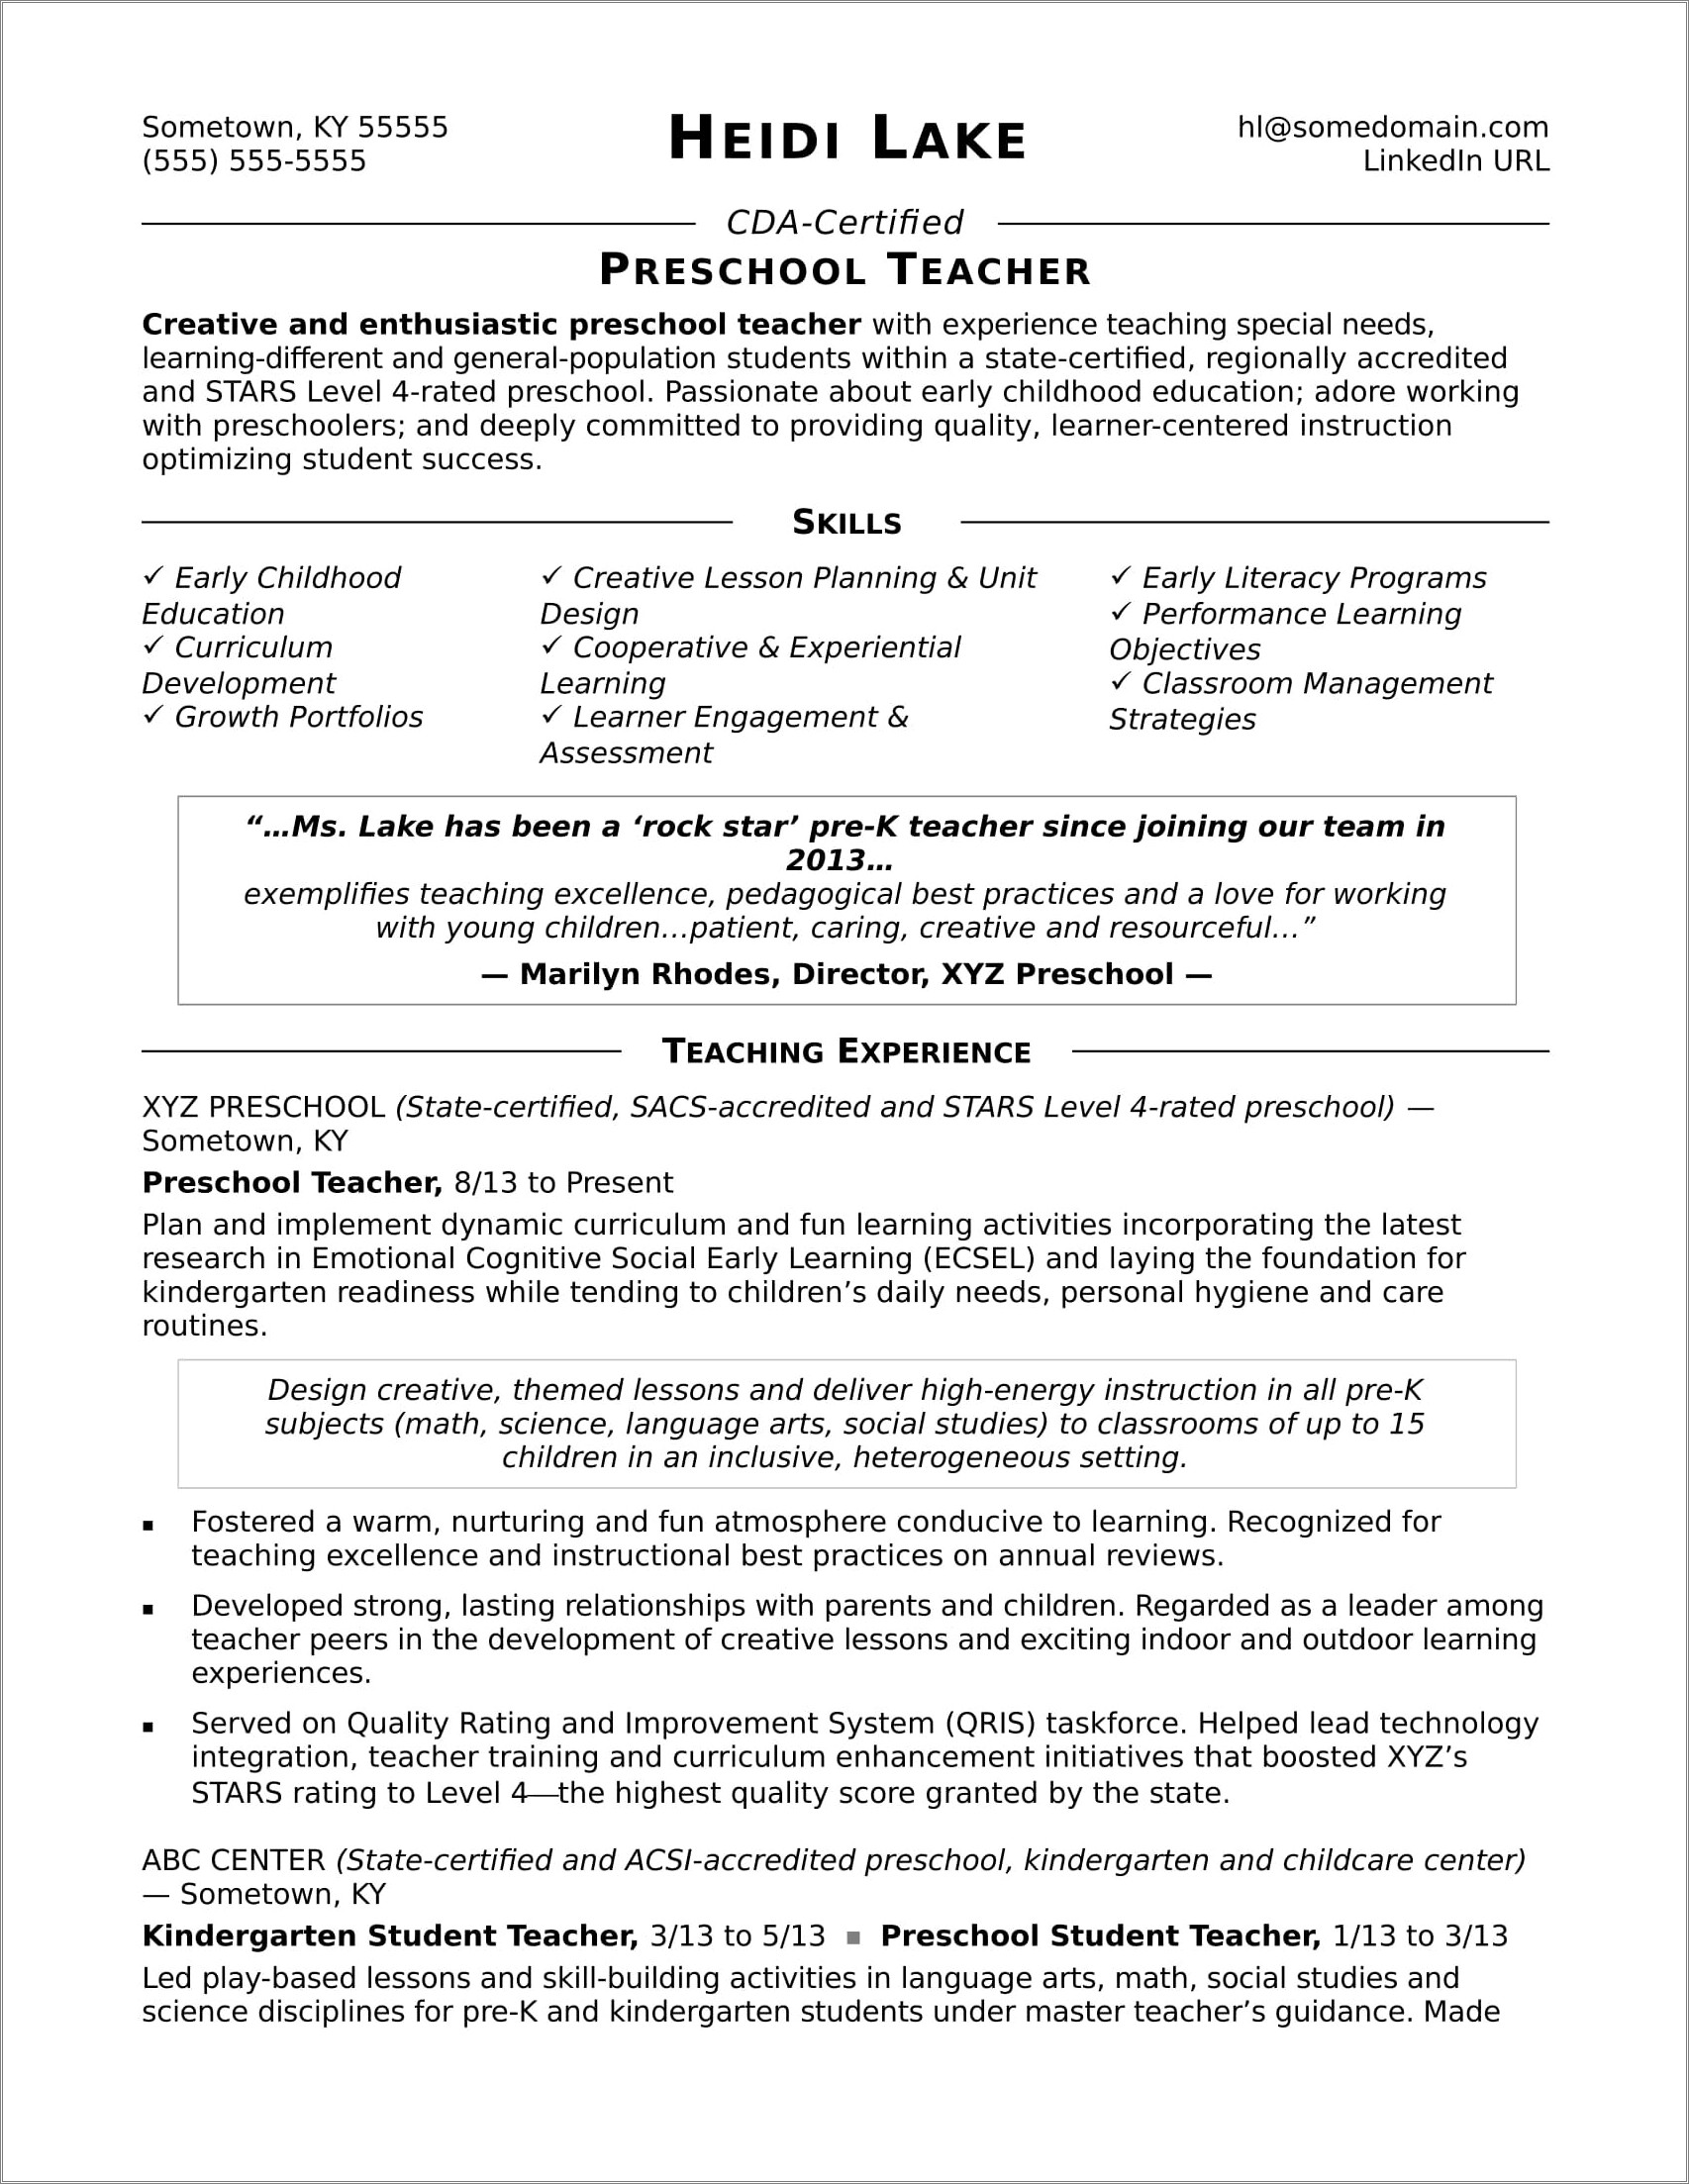 Resume Objective Examples For Teachers Leaving Classroom